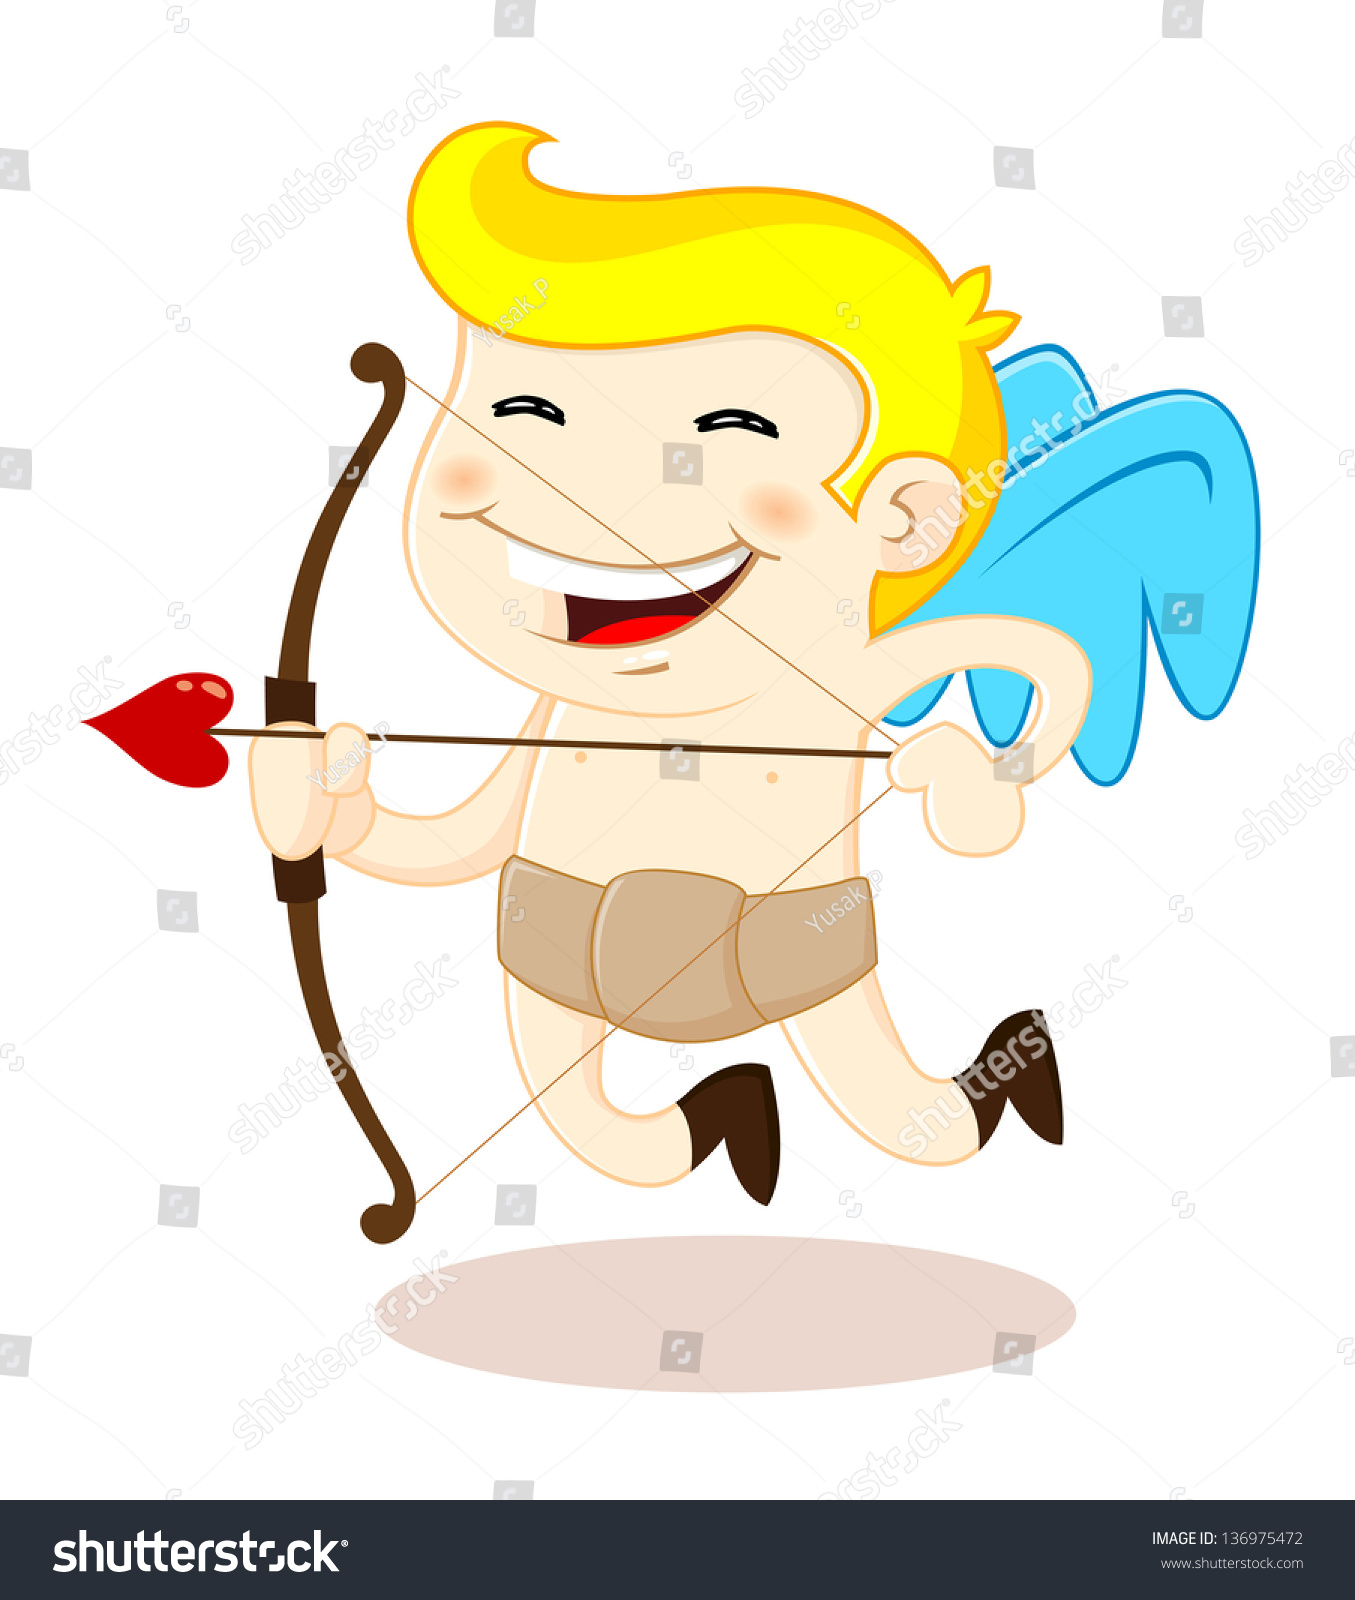 Cute Little Cupid Holding Bow Arrow Stock Vector Royalty Free 136975472 Shutterstock 2200